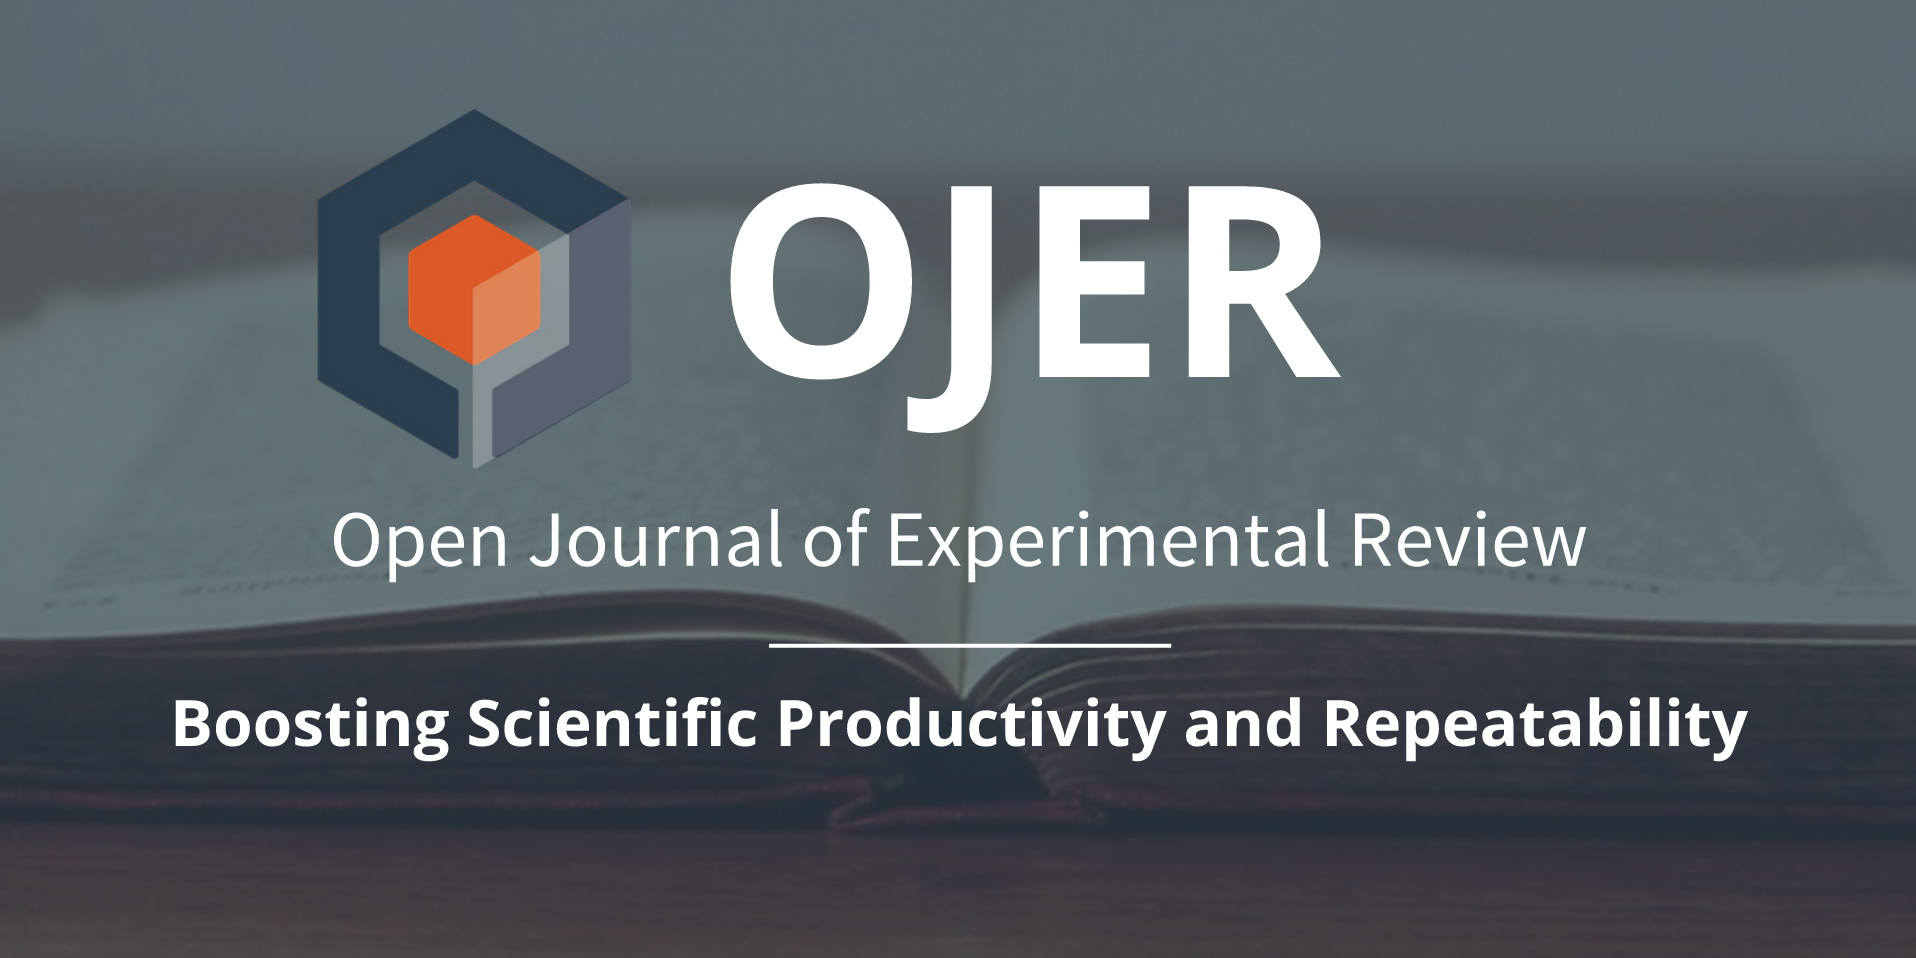 Open Journal of Experimental Review